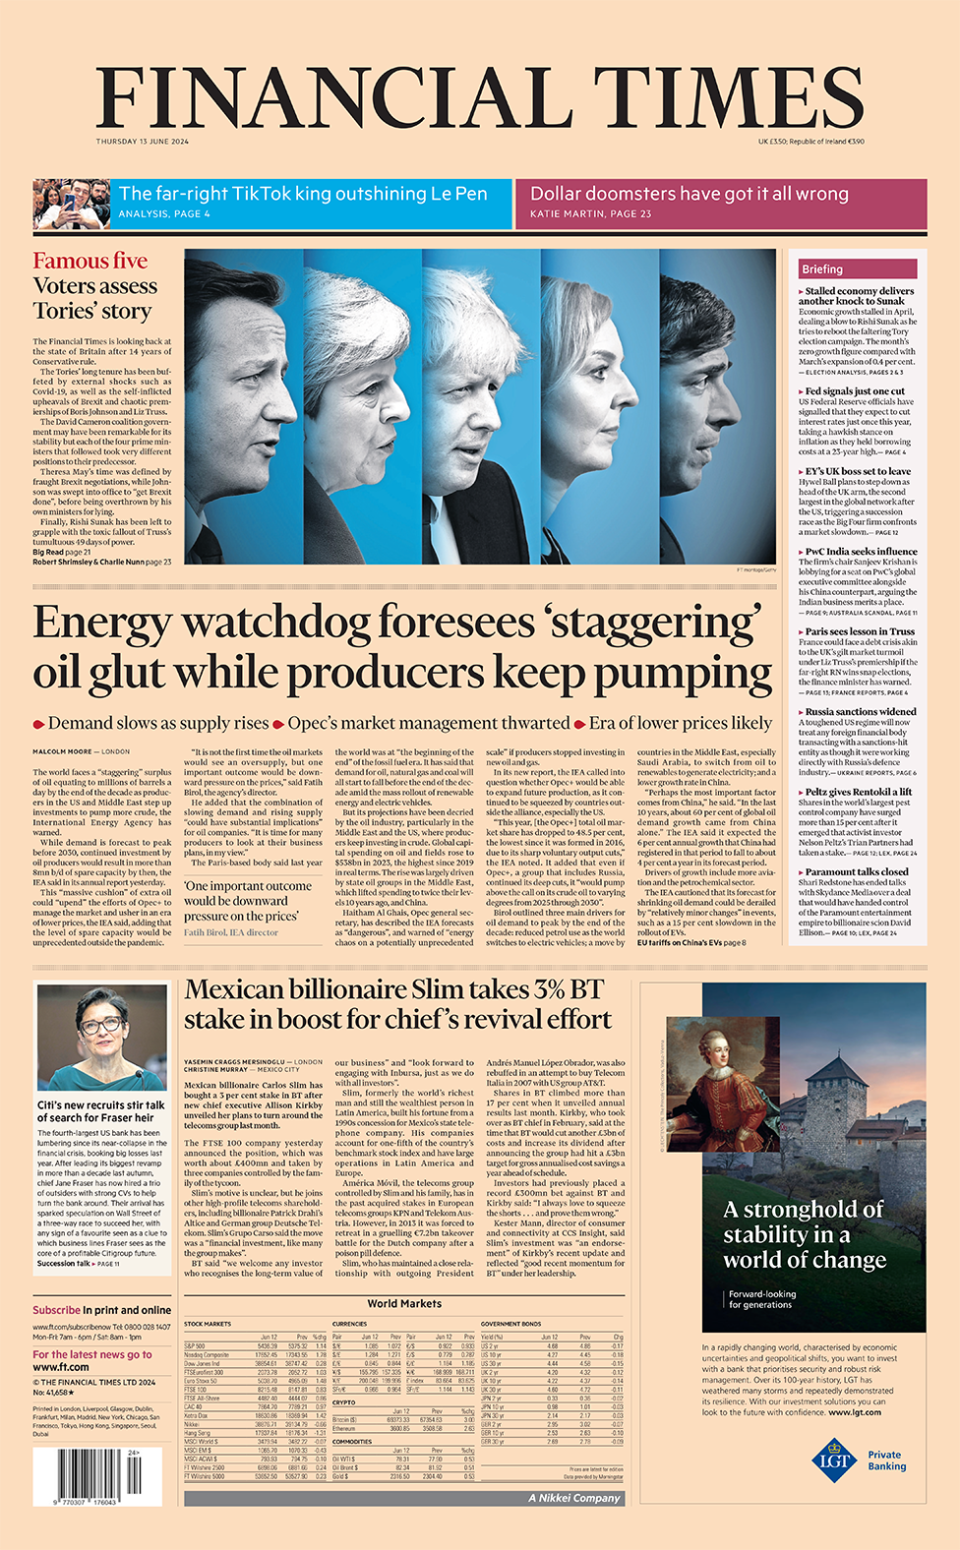 FT headline: "Energy watchdog foresees ‘staggering’ oil glut while producers keep pumping"